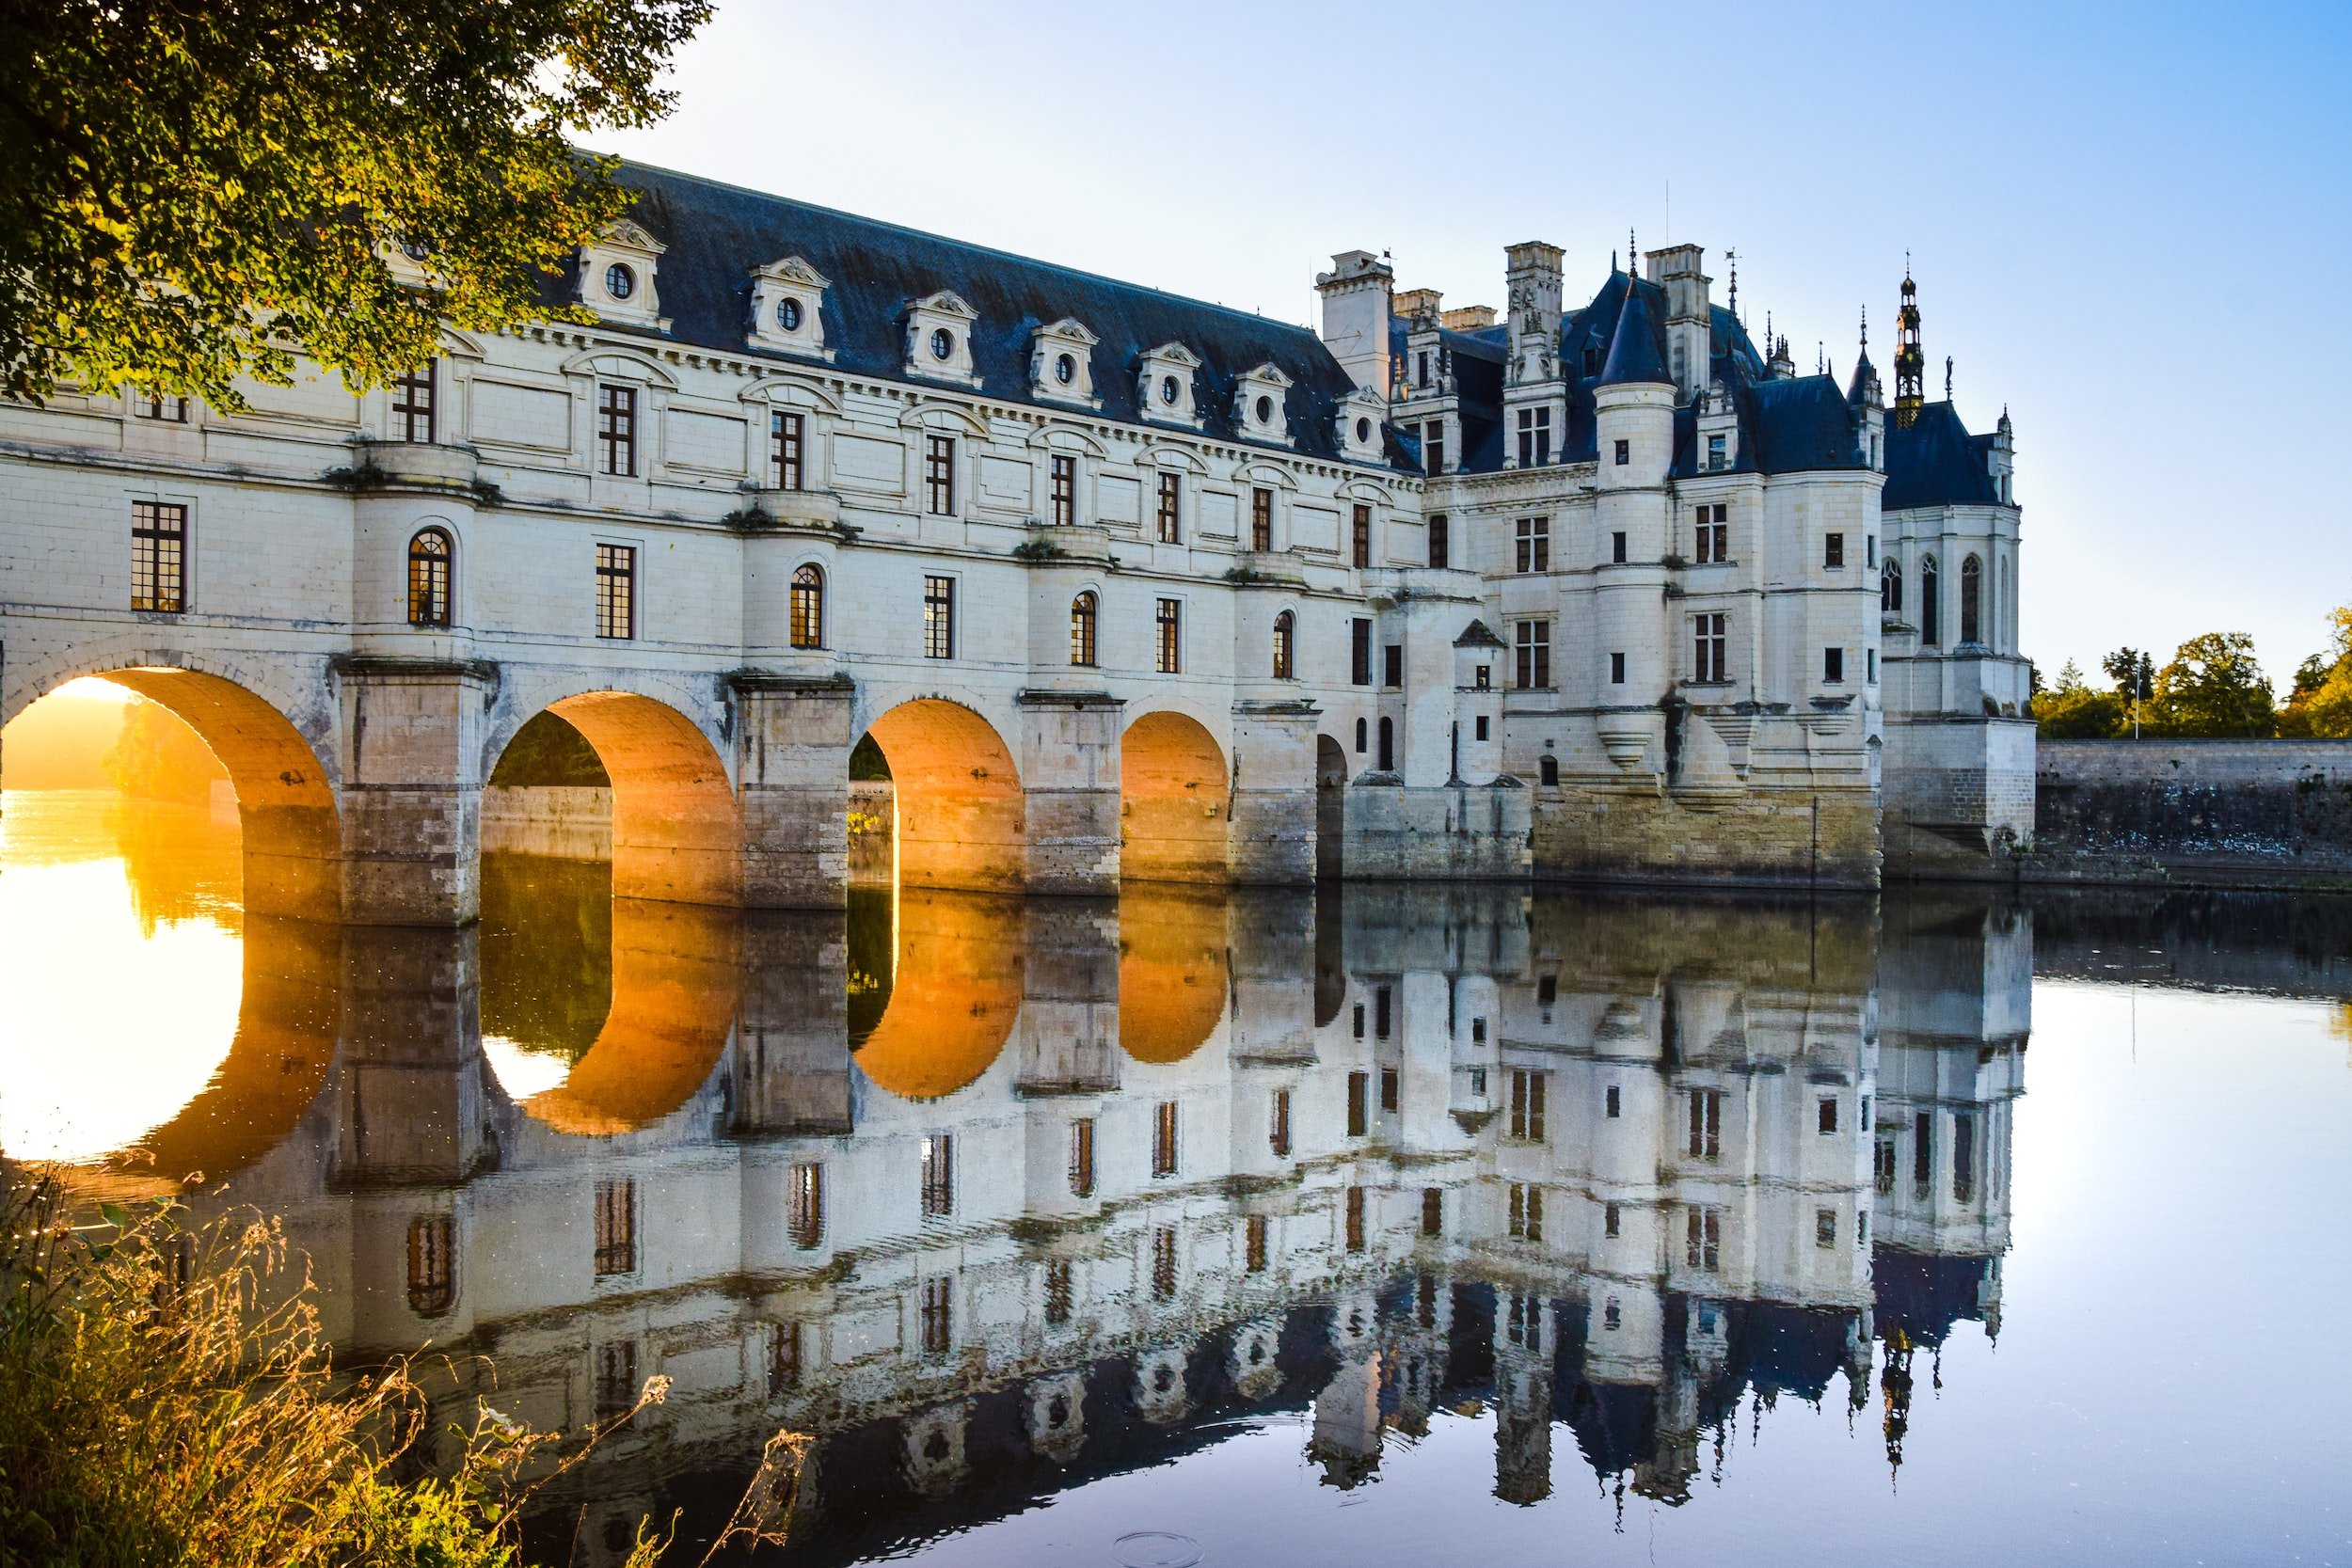 A visit to the châteaux of the Loire Valley for a company seminar